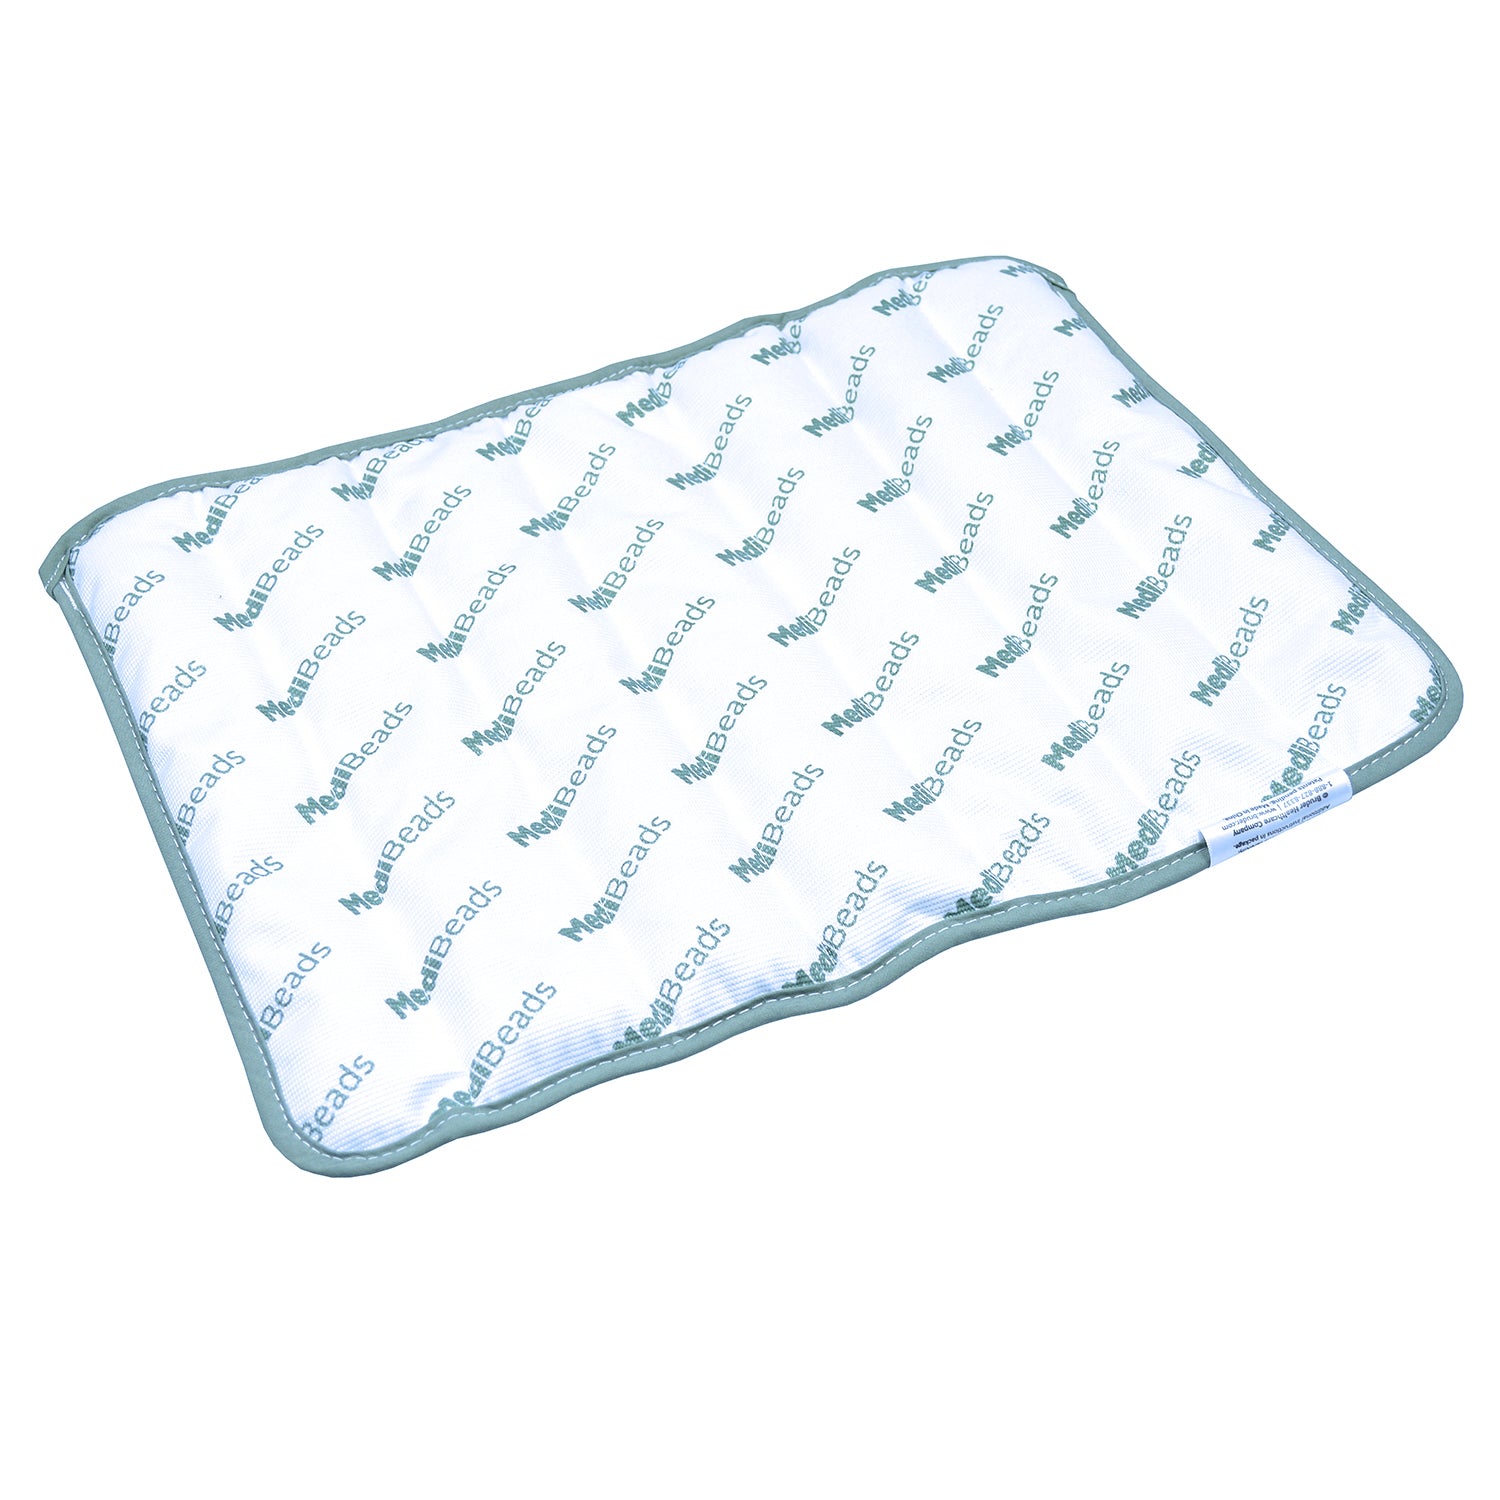 Microwave actived moist heat king pad, King pad, moist heat therapy, back relief, moist heat